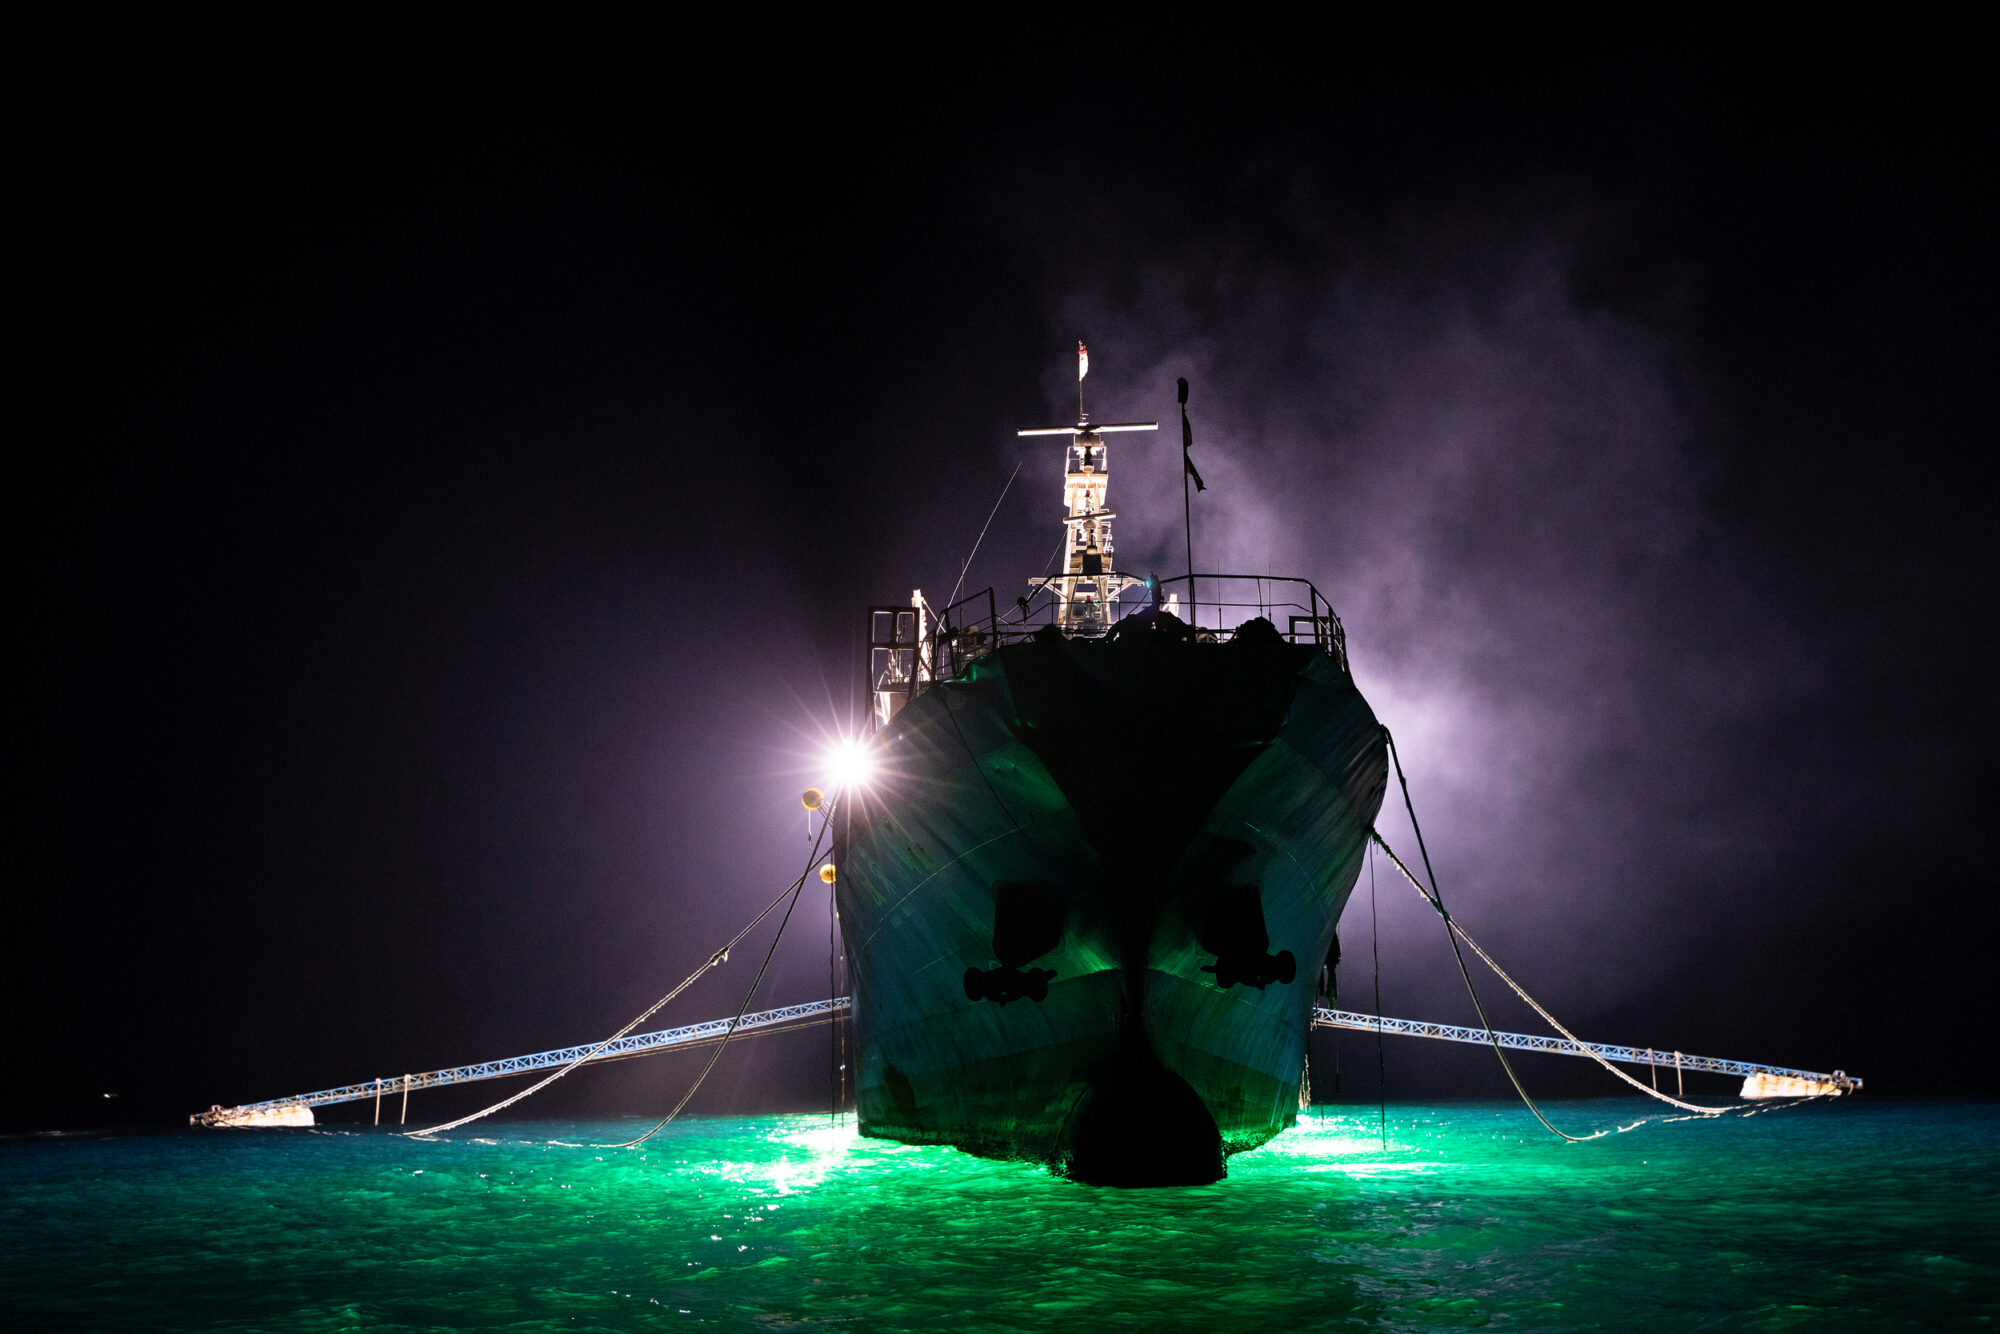 Photographed from below, the prow of a giant fishing boat looms out of the darkness, surrounded by a halo of mist. Bright lights used to attract squid make the surrounding water appear bright green.